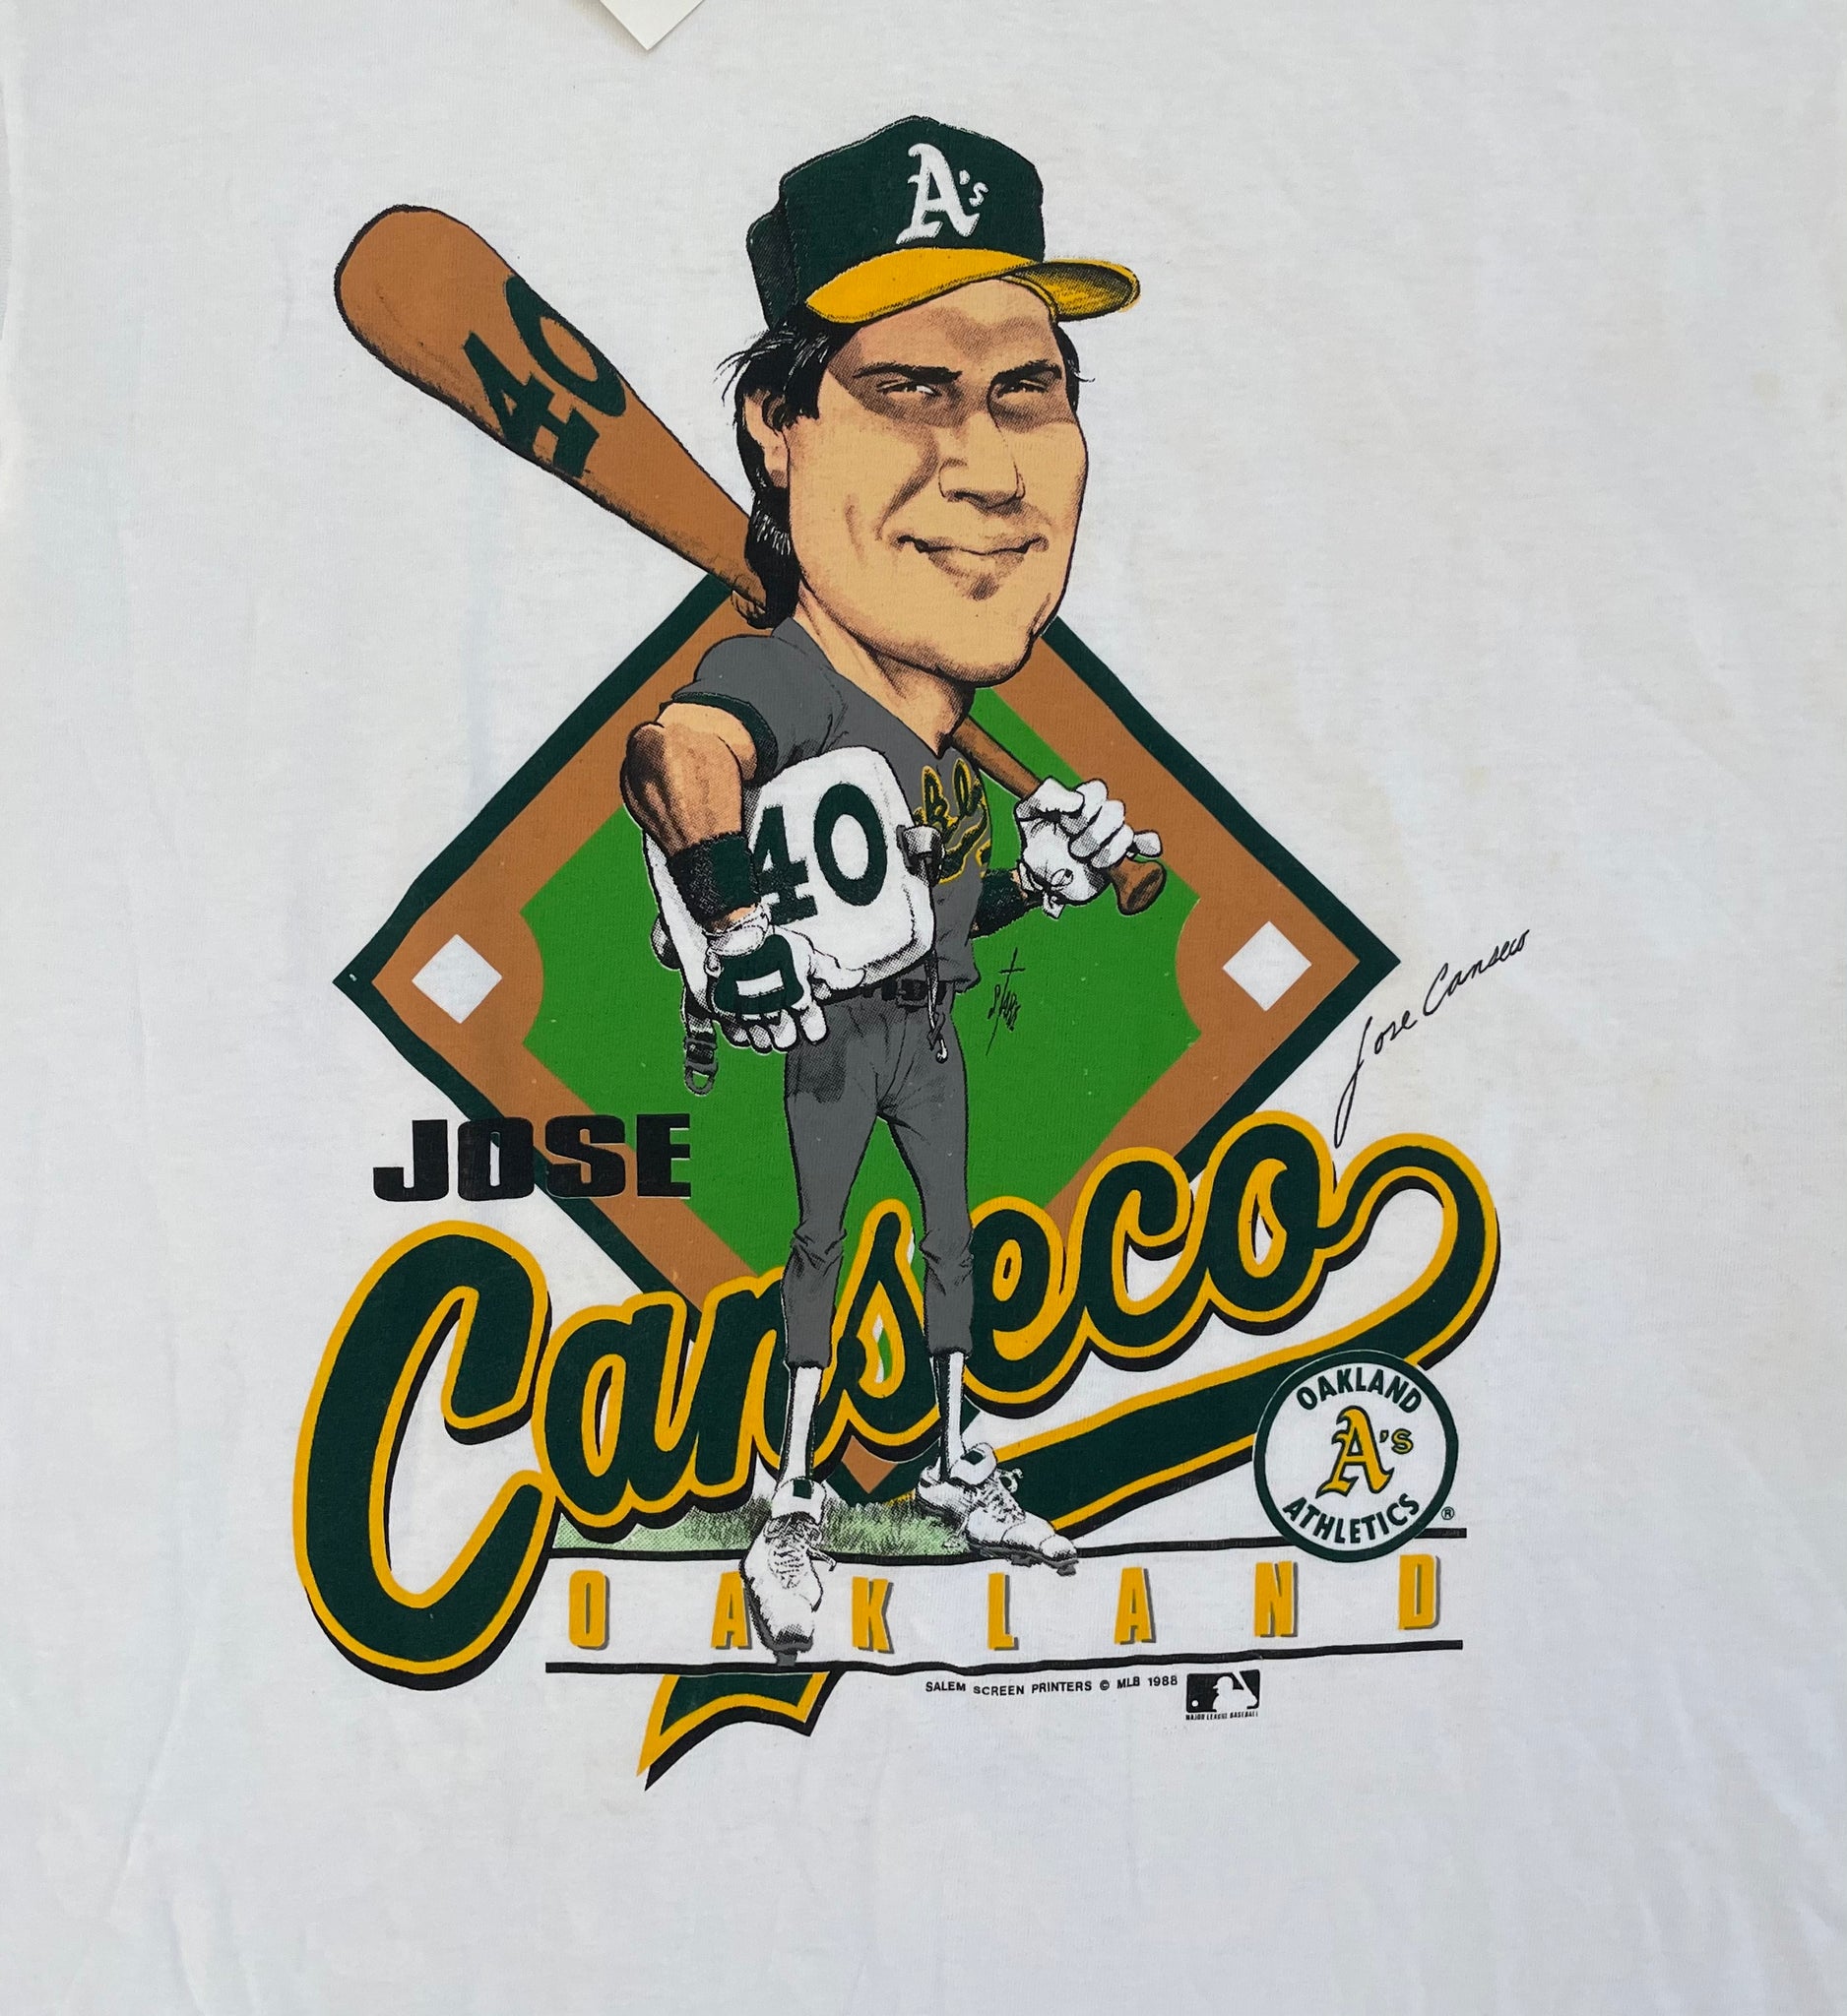 Jose Canseco Gallery